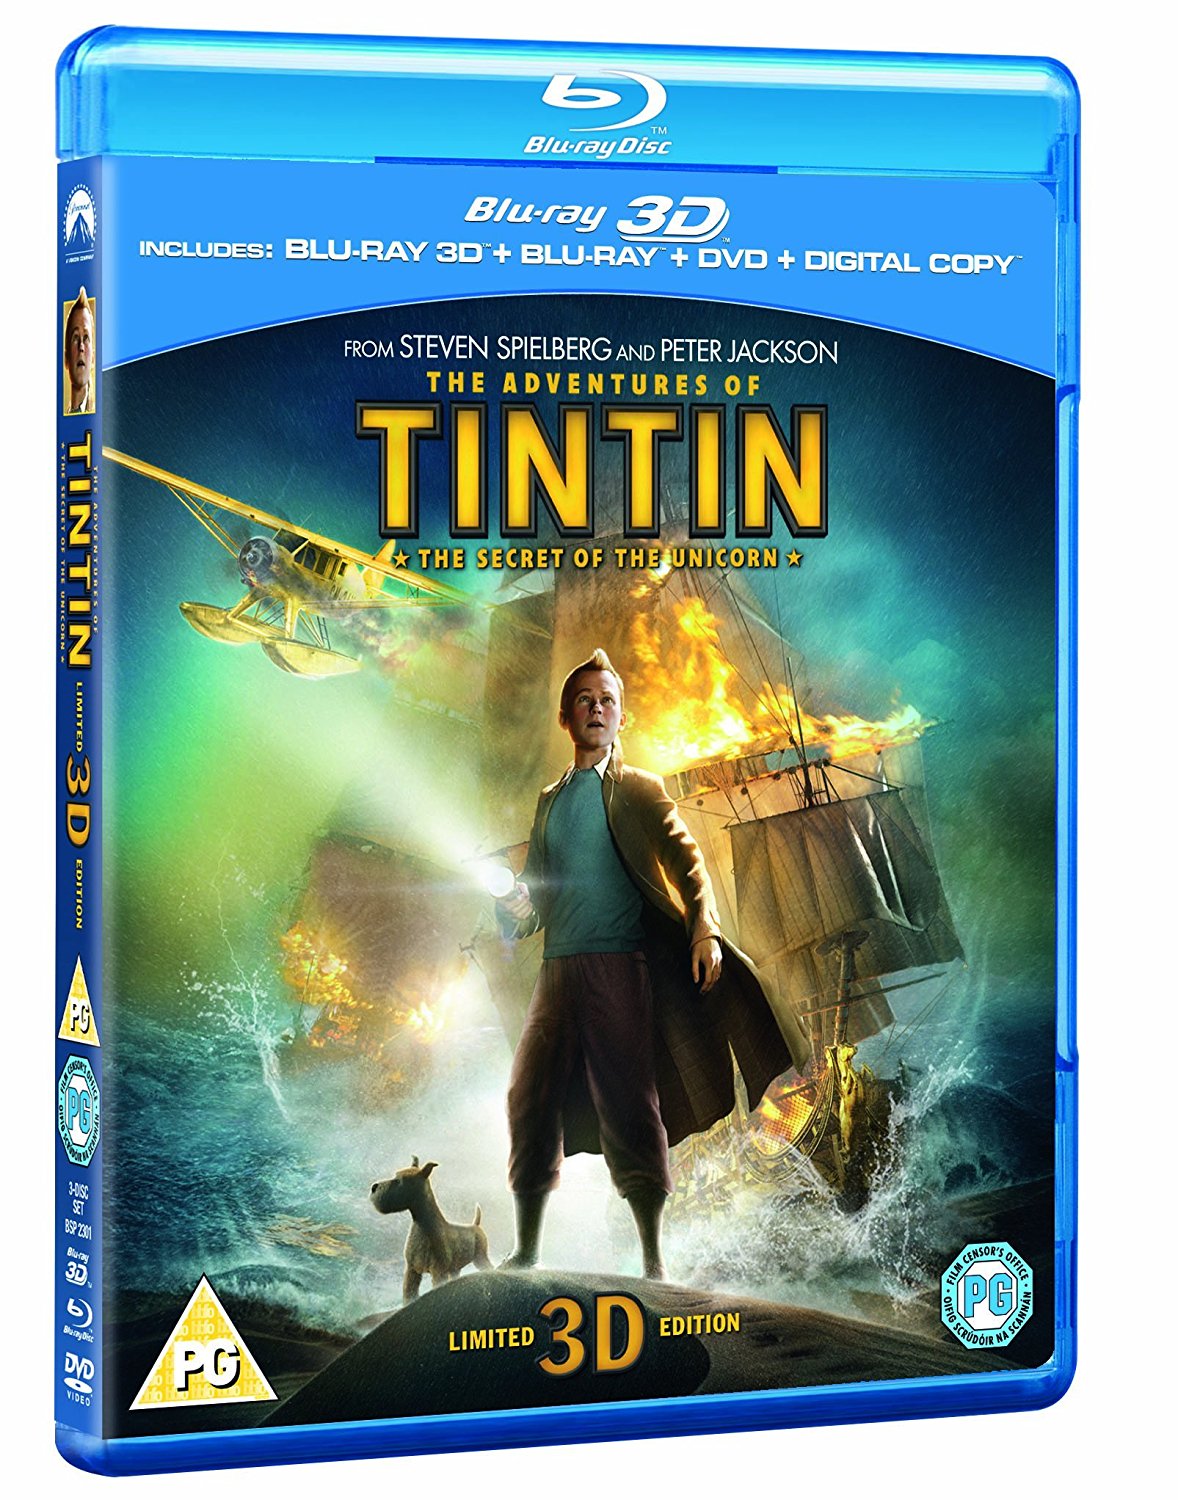 The Adventures of Tintin: The Secret Of The Unicorn (3D Blu-ray  Blu-ray  DVD and Digital Copy)